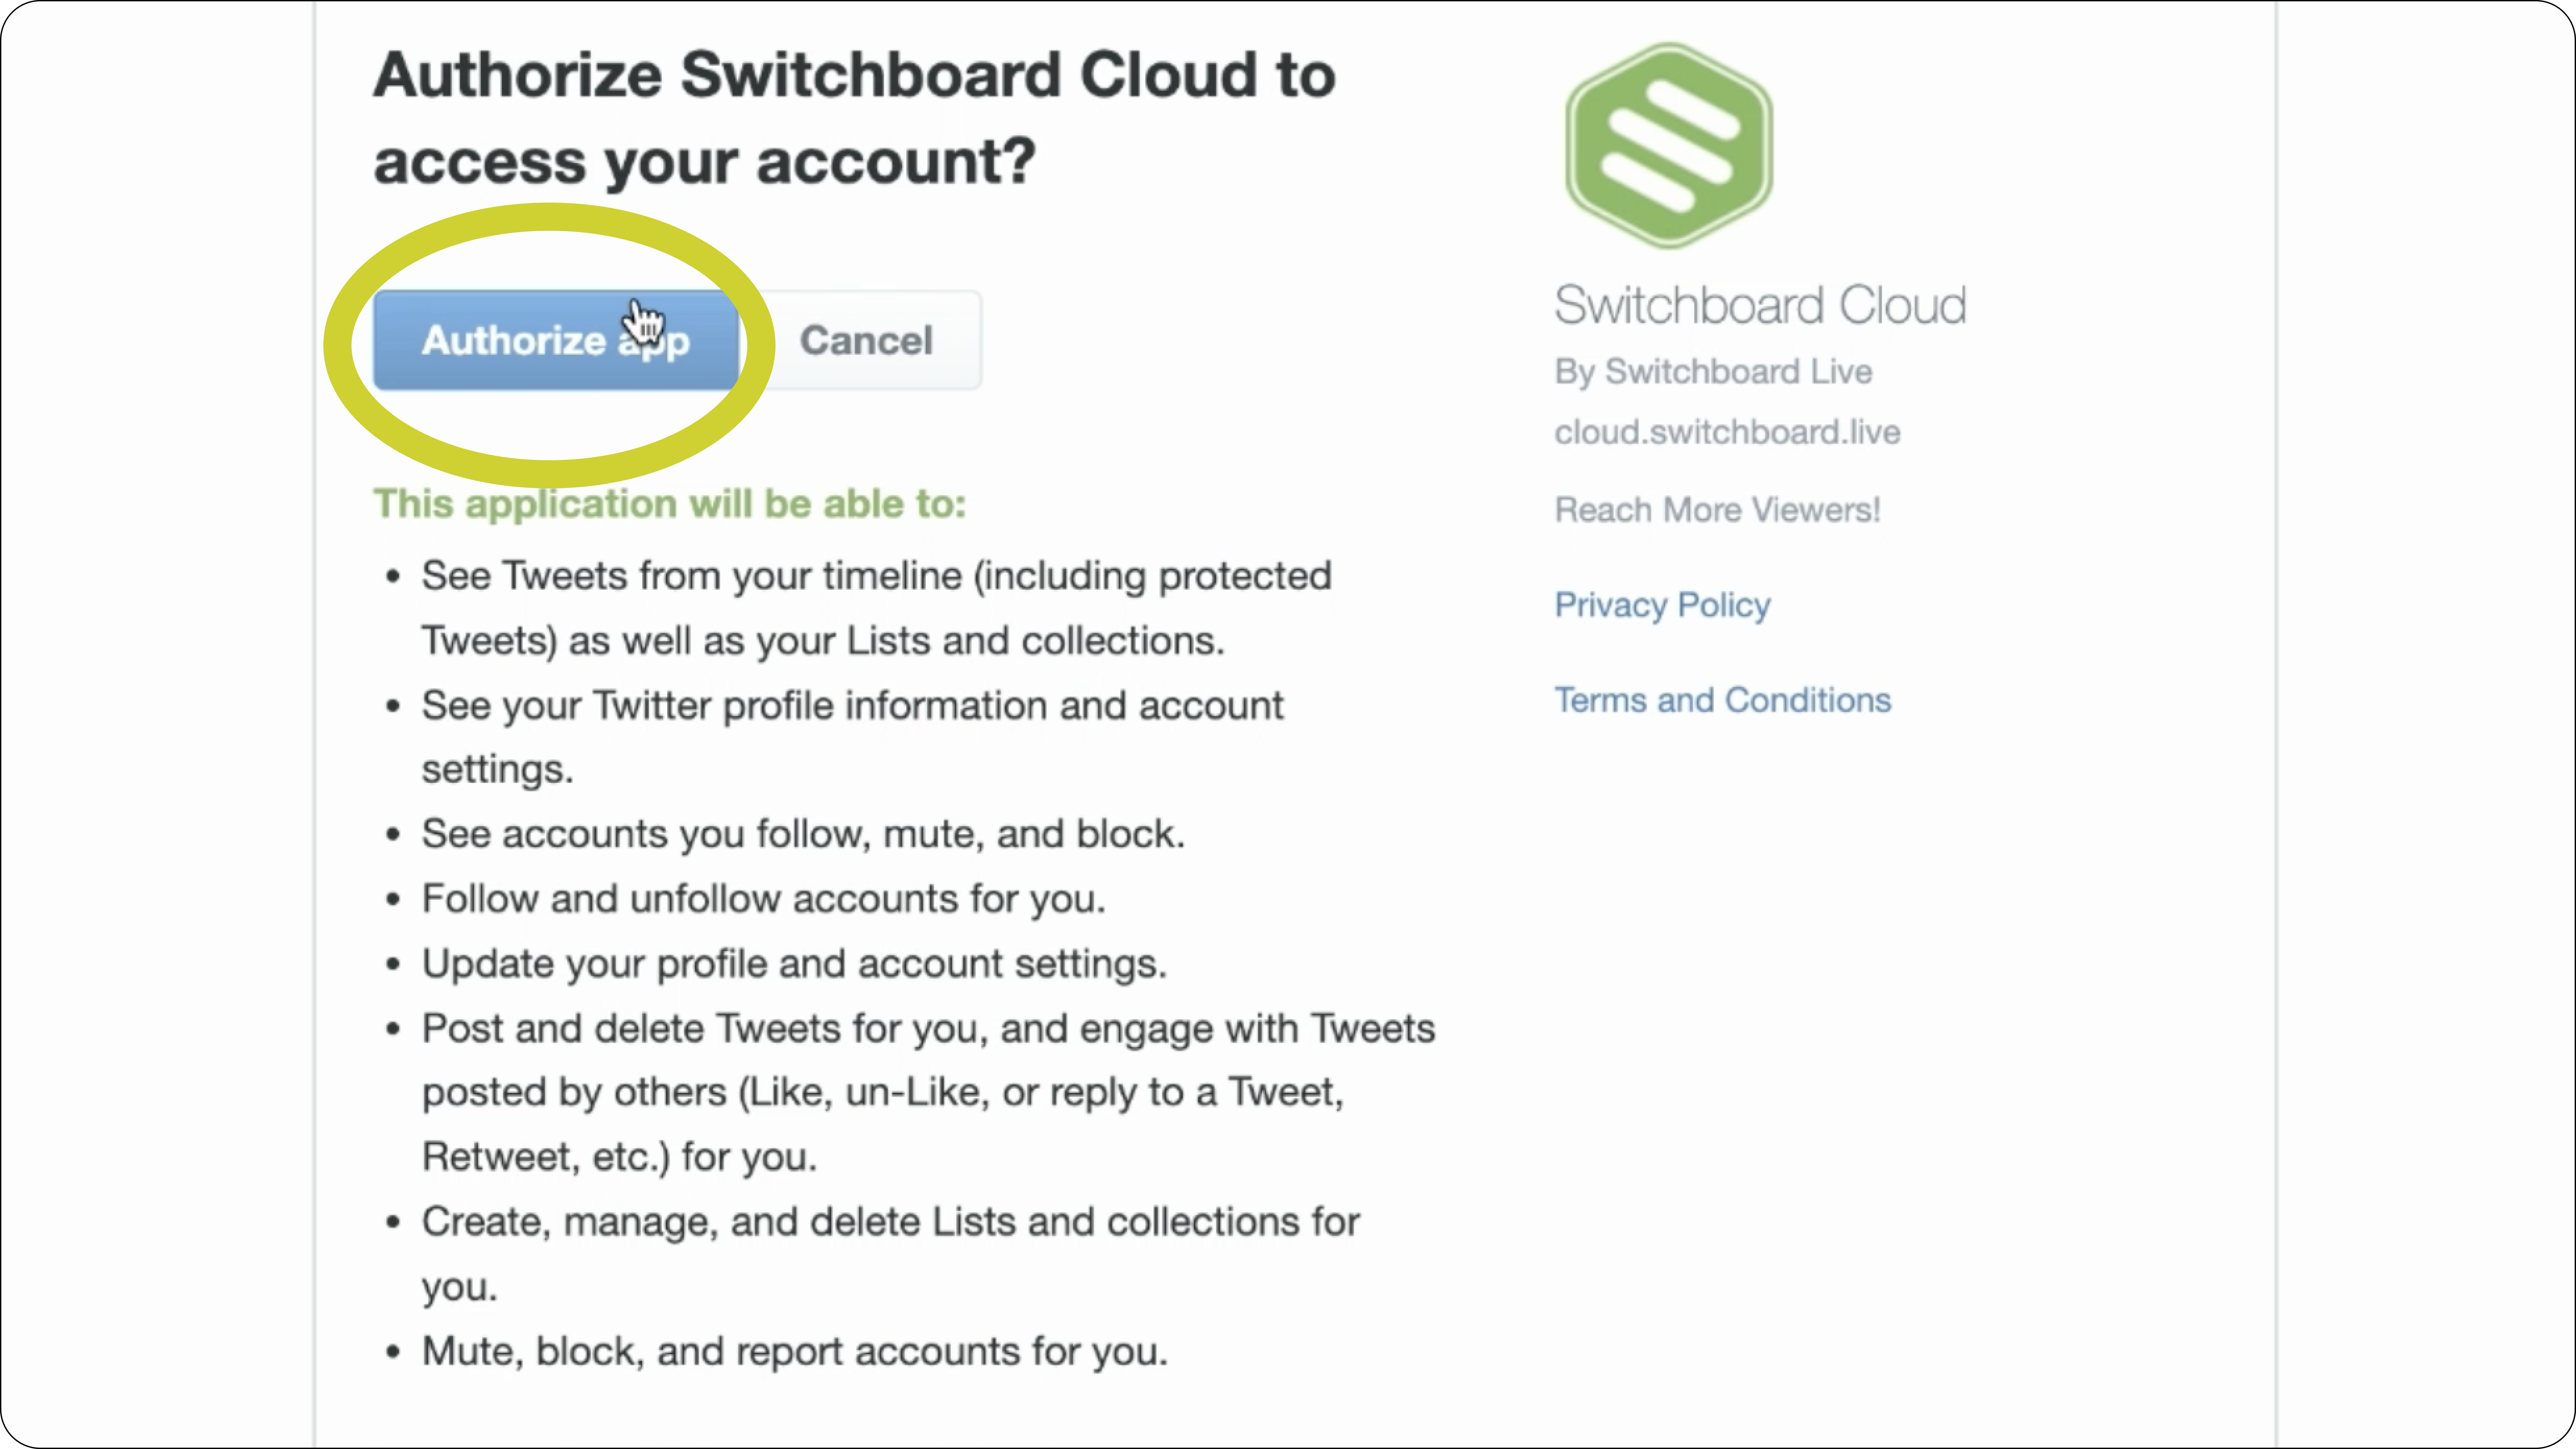 switchboard-cloud-re-authorize-follow-prompts.png